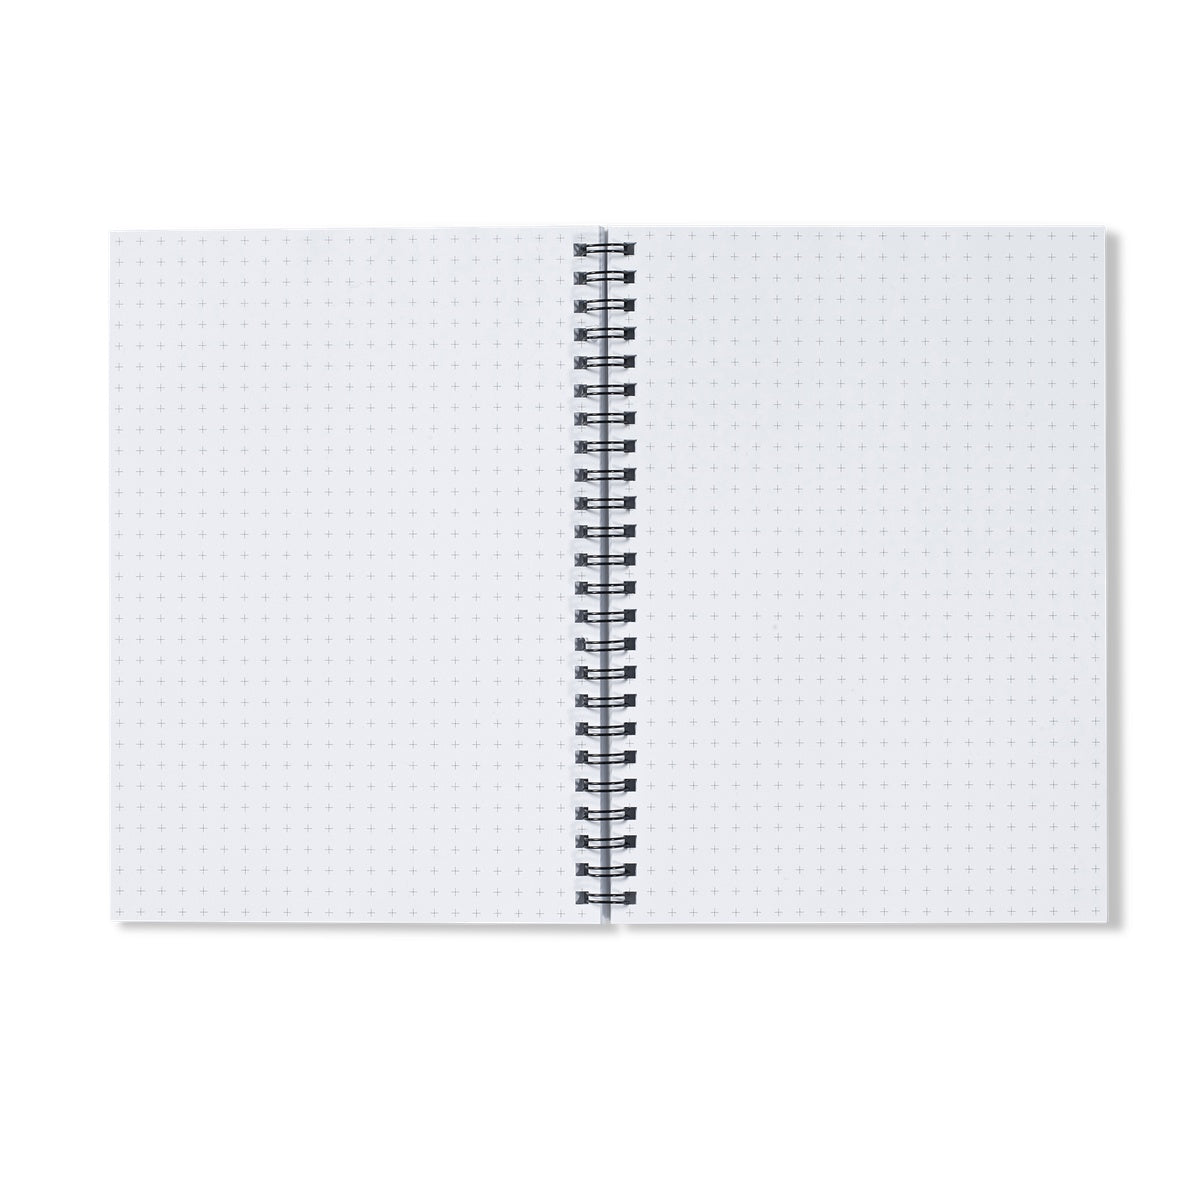 Pencil Point Largs Art Gifts Notebook